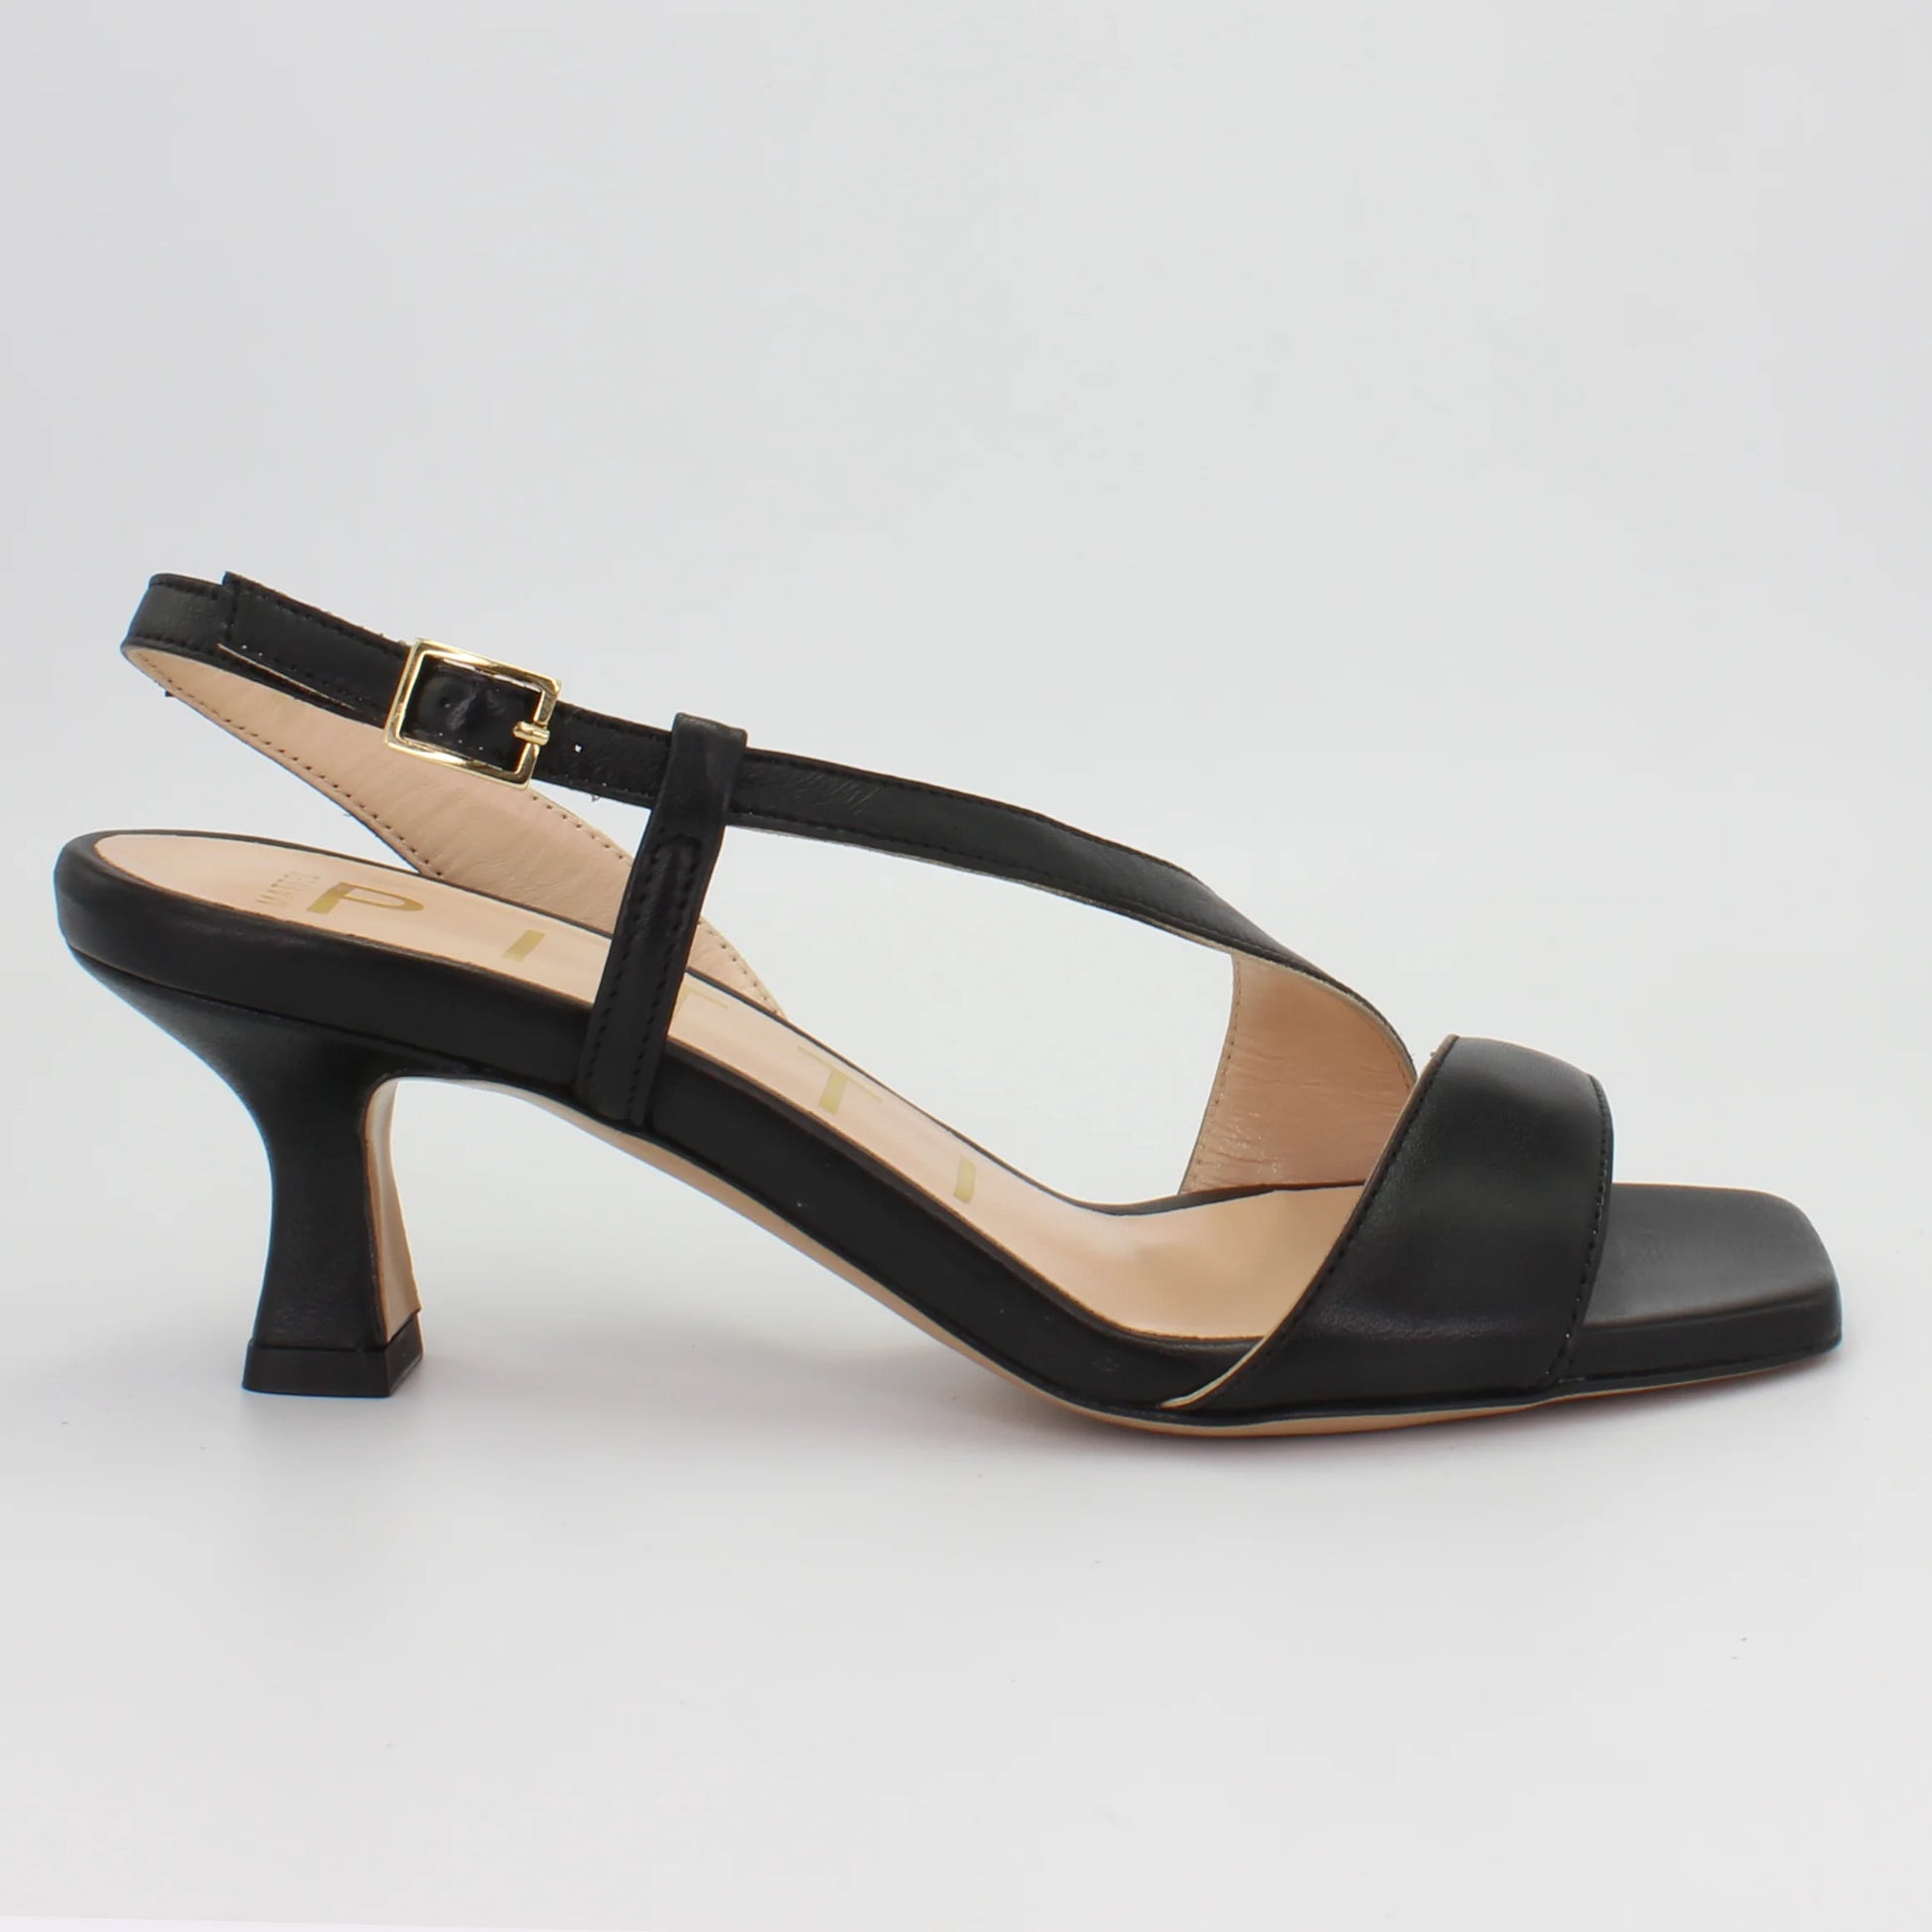 Shop Handmade Italian Leather Low Heel in Nero (MP22102) or browse our range of hand-made Italian shoes for women in leather or suede in-store at Aliverti Cape Town, or shop online. We deliver in South Africa & offer multiple payment plans as well as accept multiple safe & secure payment methods.